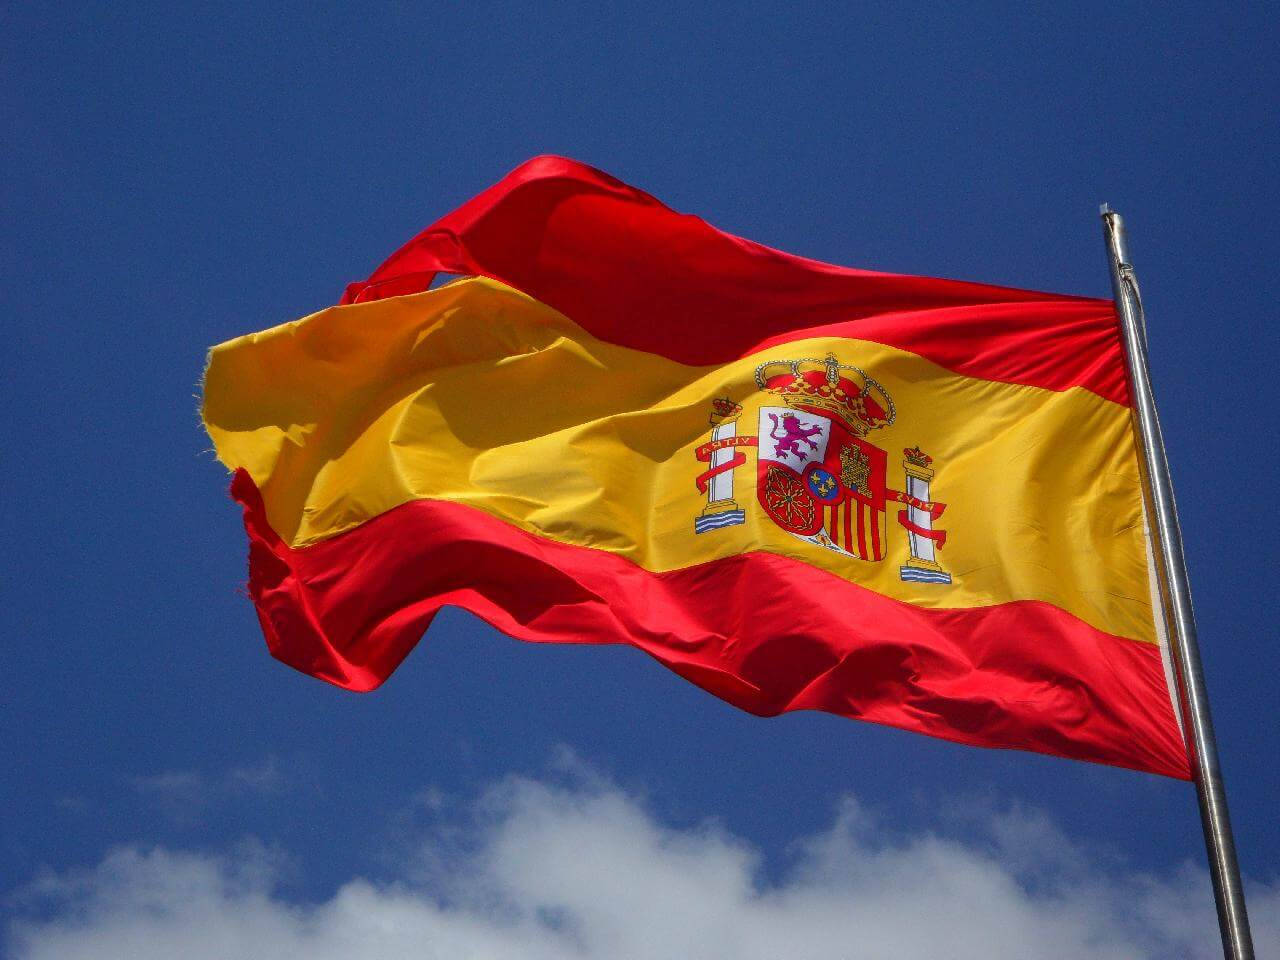 Caption: Spain's National Pride - Magnificent Spain Flag Soaring High Against The Clear Blue Sky Wallpaper